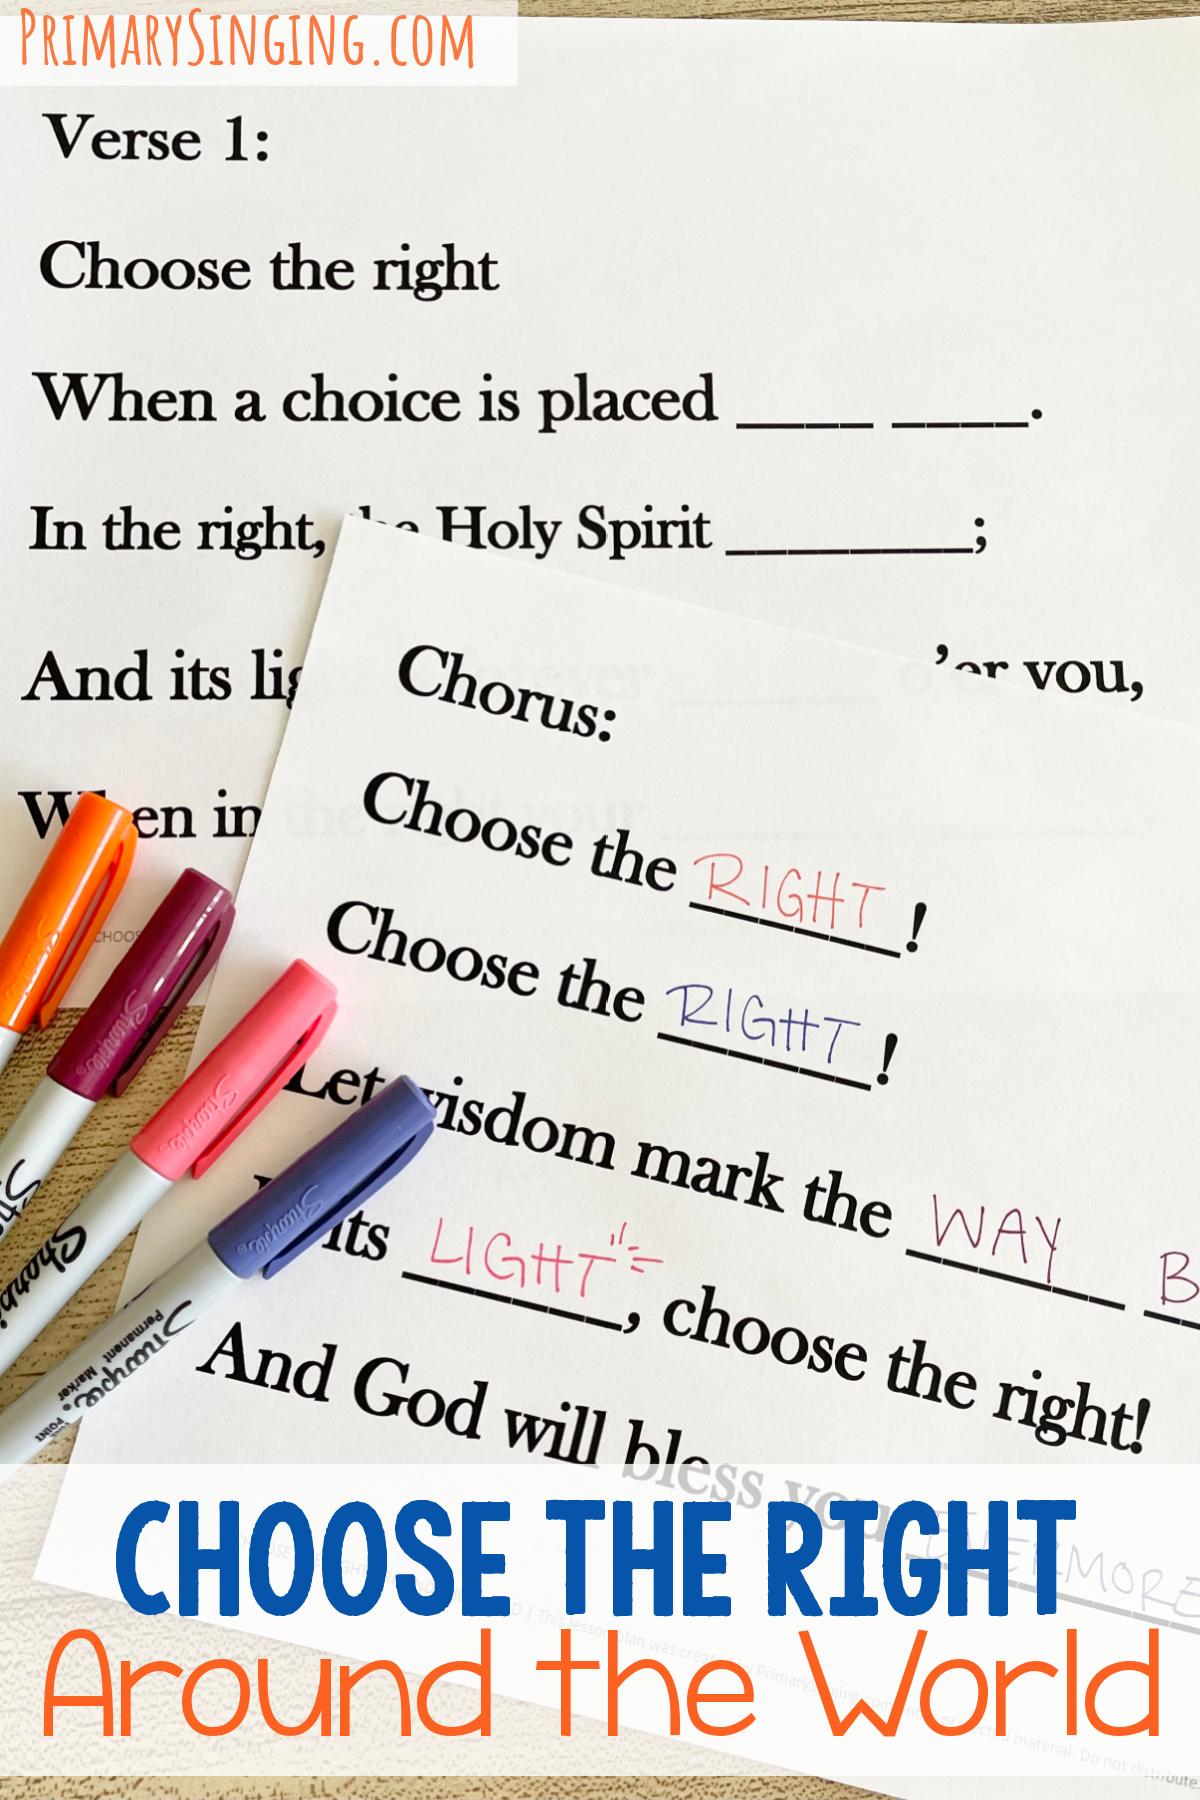 Choose the Right Around the World - use this fun word representation activity and take turns filling in missing word blanks with printable song helps for LDS Primary Music Leaders.